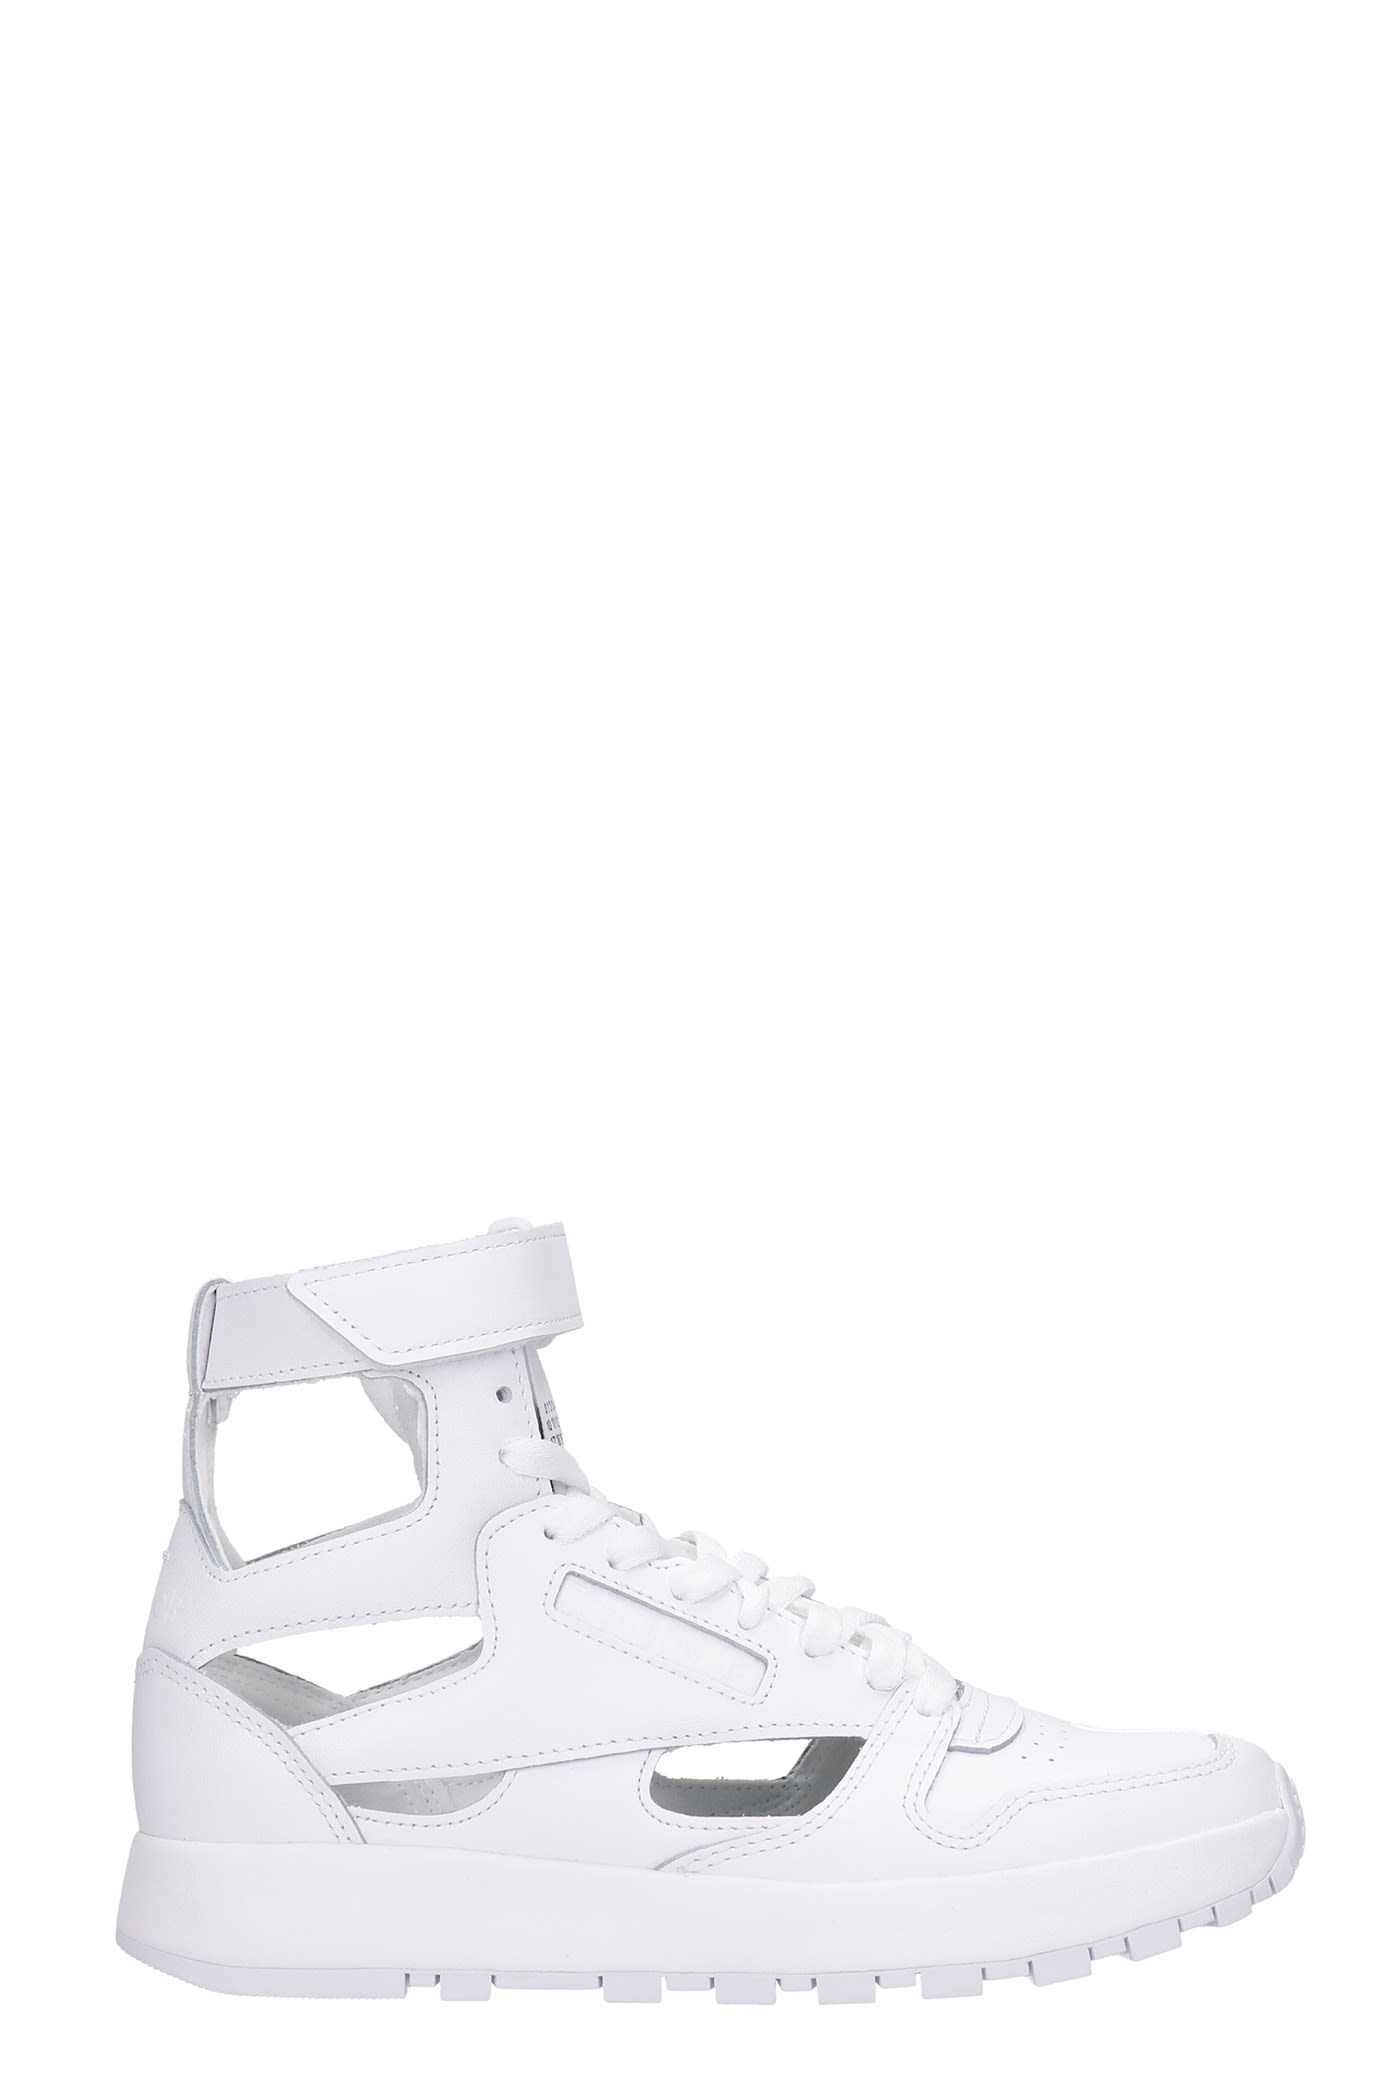 Buy Maison Margiela Project Cl 0 Sneakers In White Leather online, shop Maison Margiela shoes with free shipping